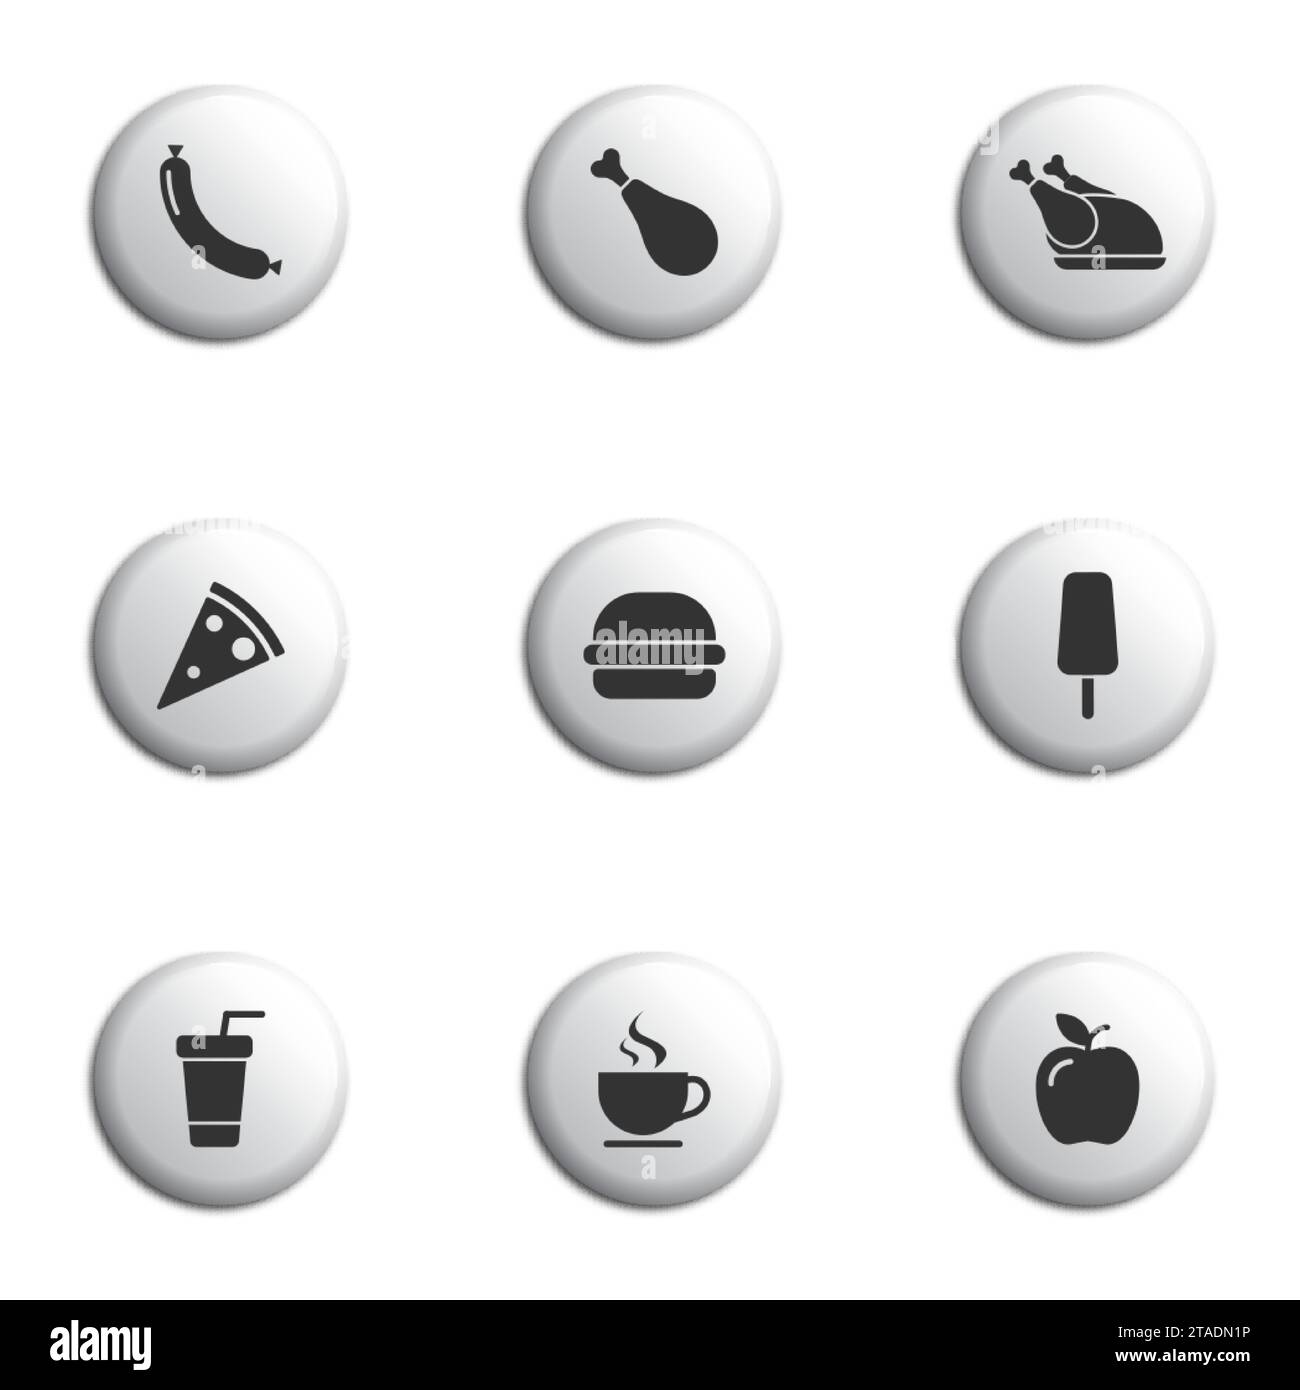 Meal кelated icon set. Food icon set. Flat vector illustration Stock Vector